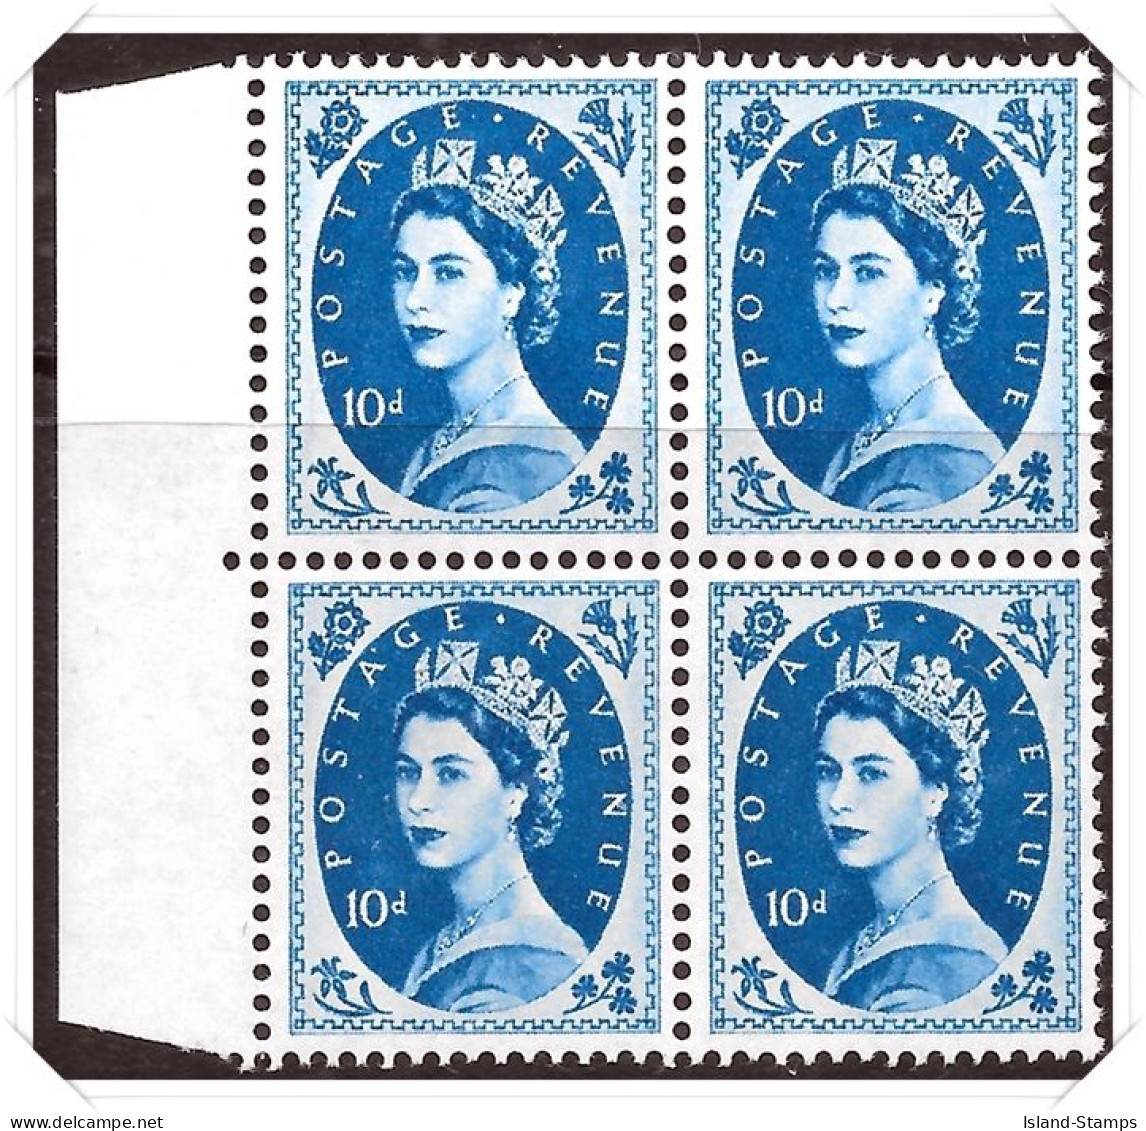 QEII Pre Decimal Wilding Definitive 10d Block Of 4 Unmounted Mint Hrd2a - Unused Stamps